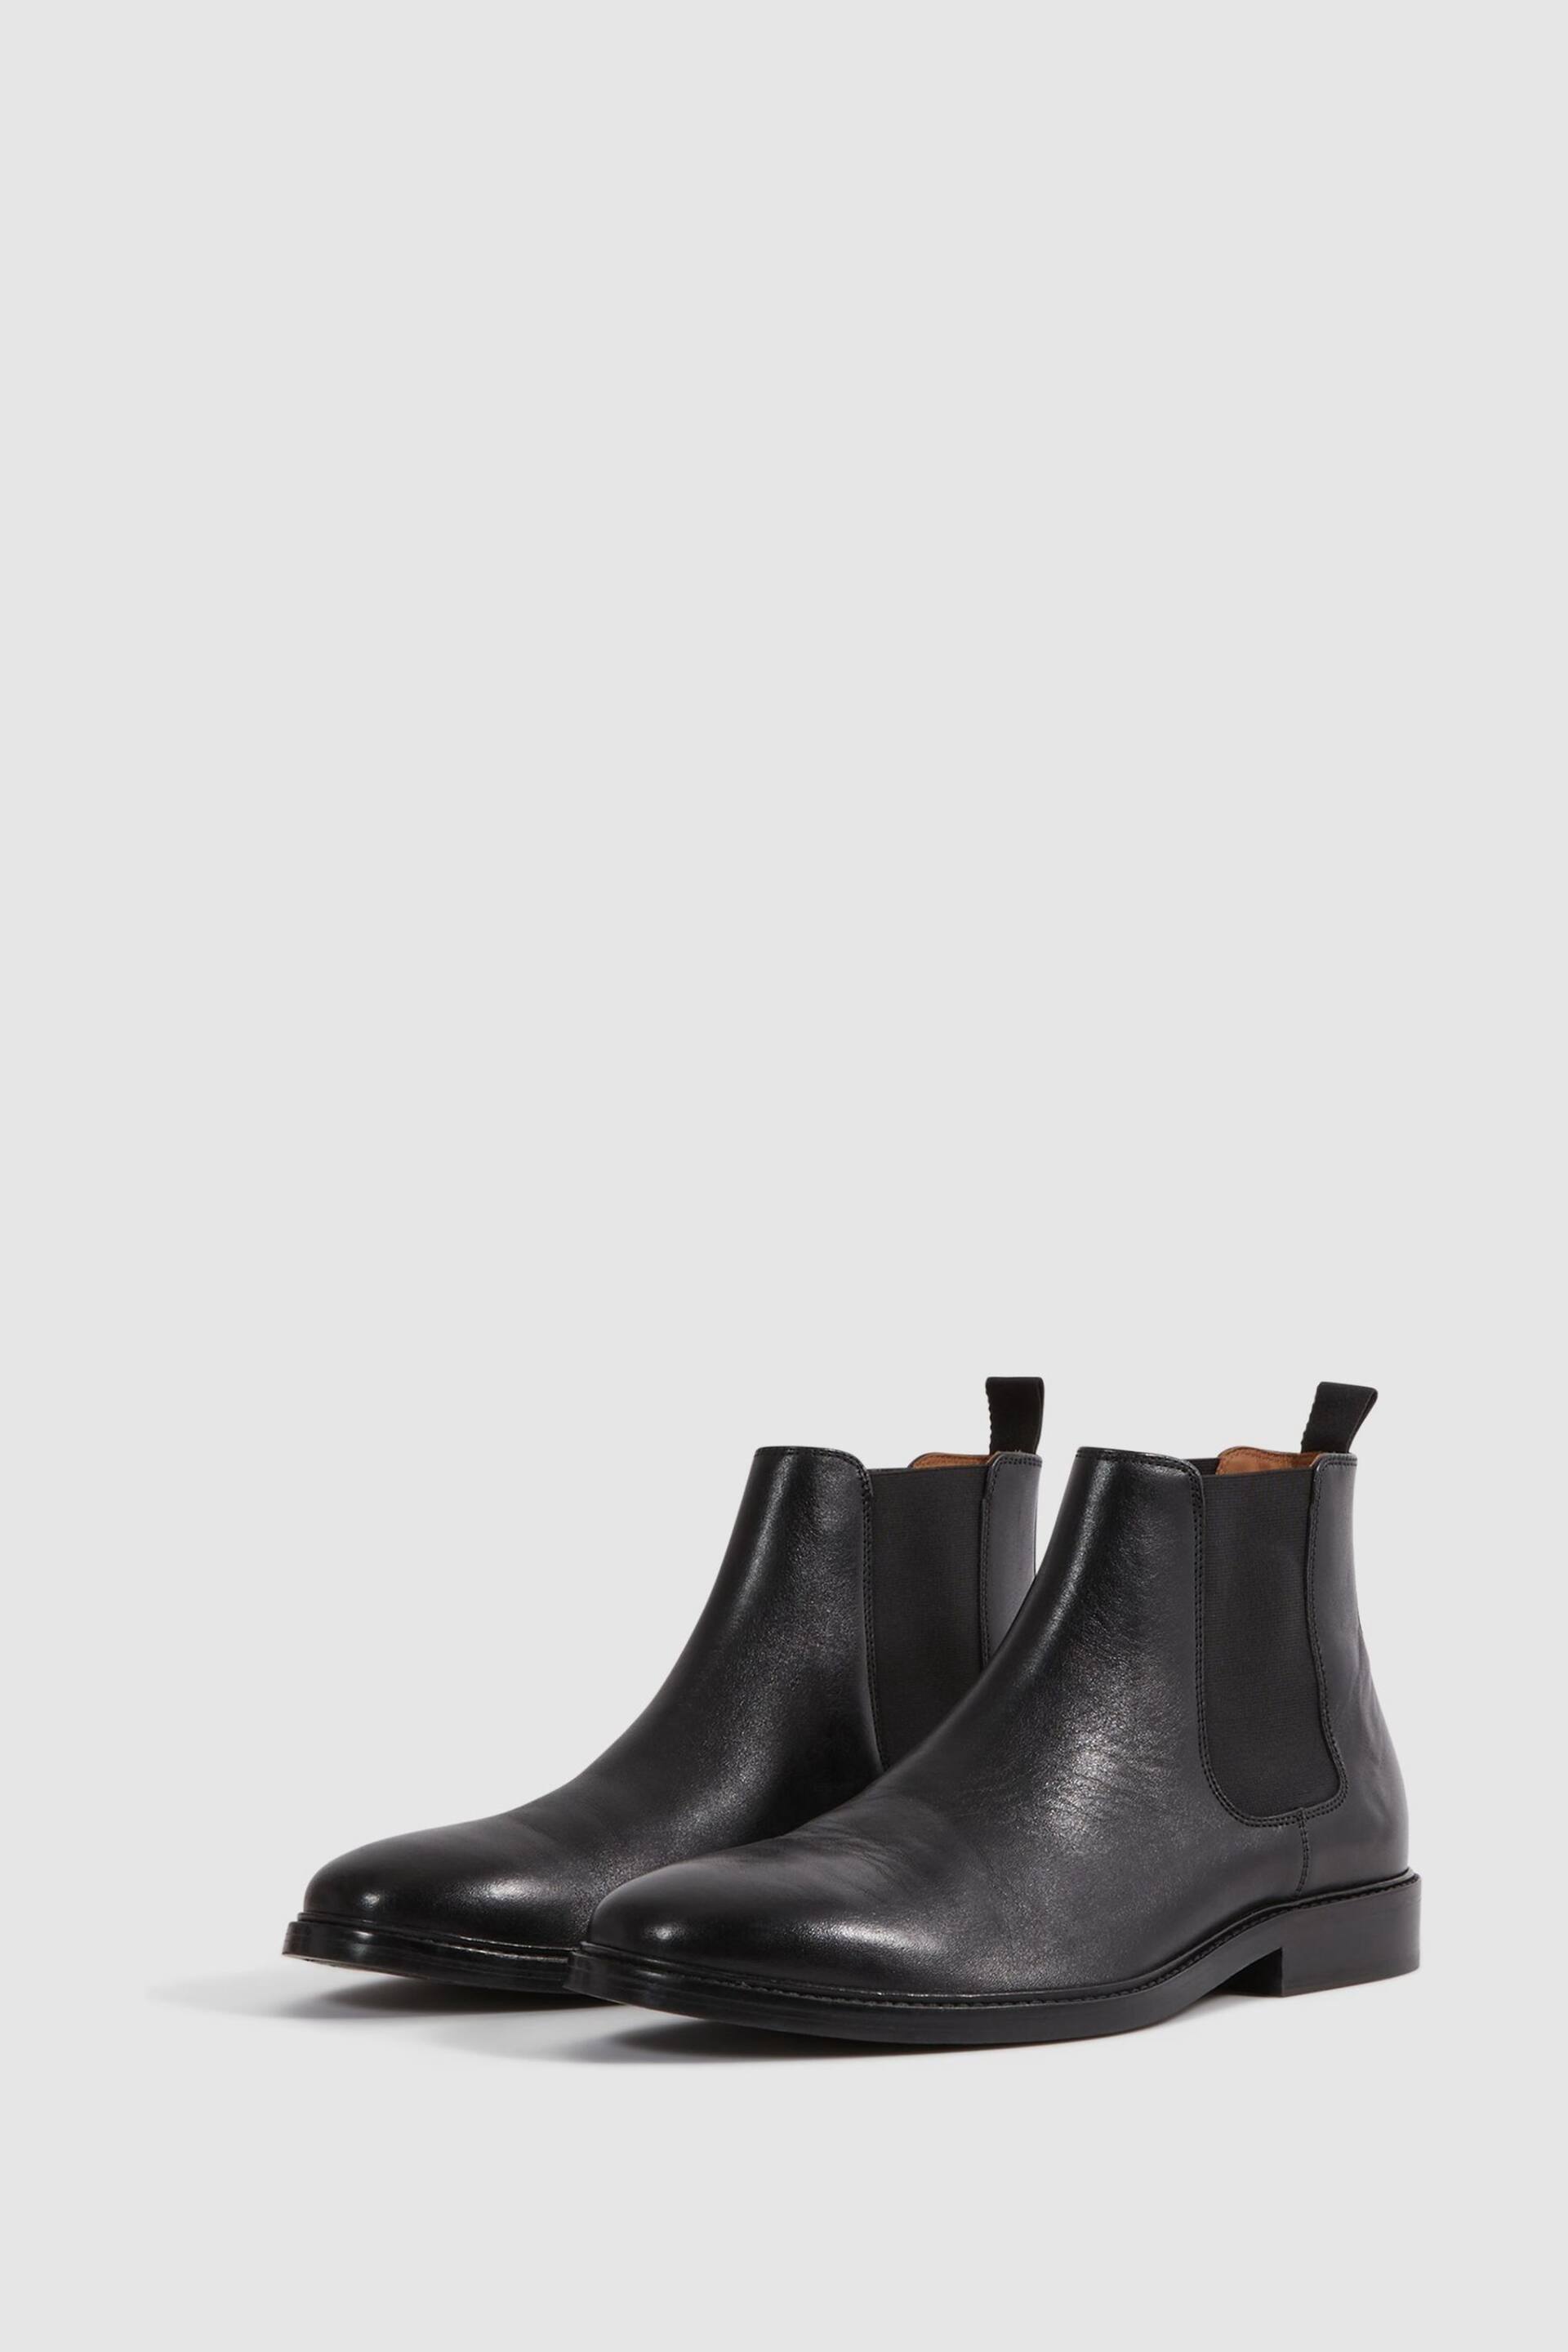 Reiss Black Renor Leather Chelsea Boots - Image 6 of 6